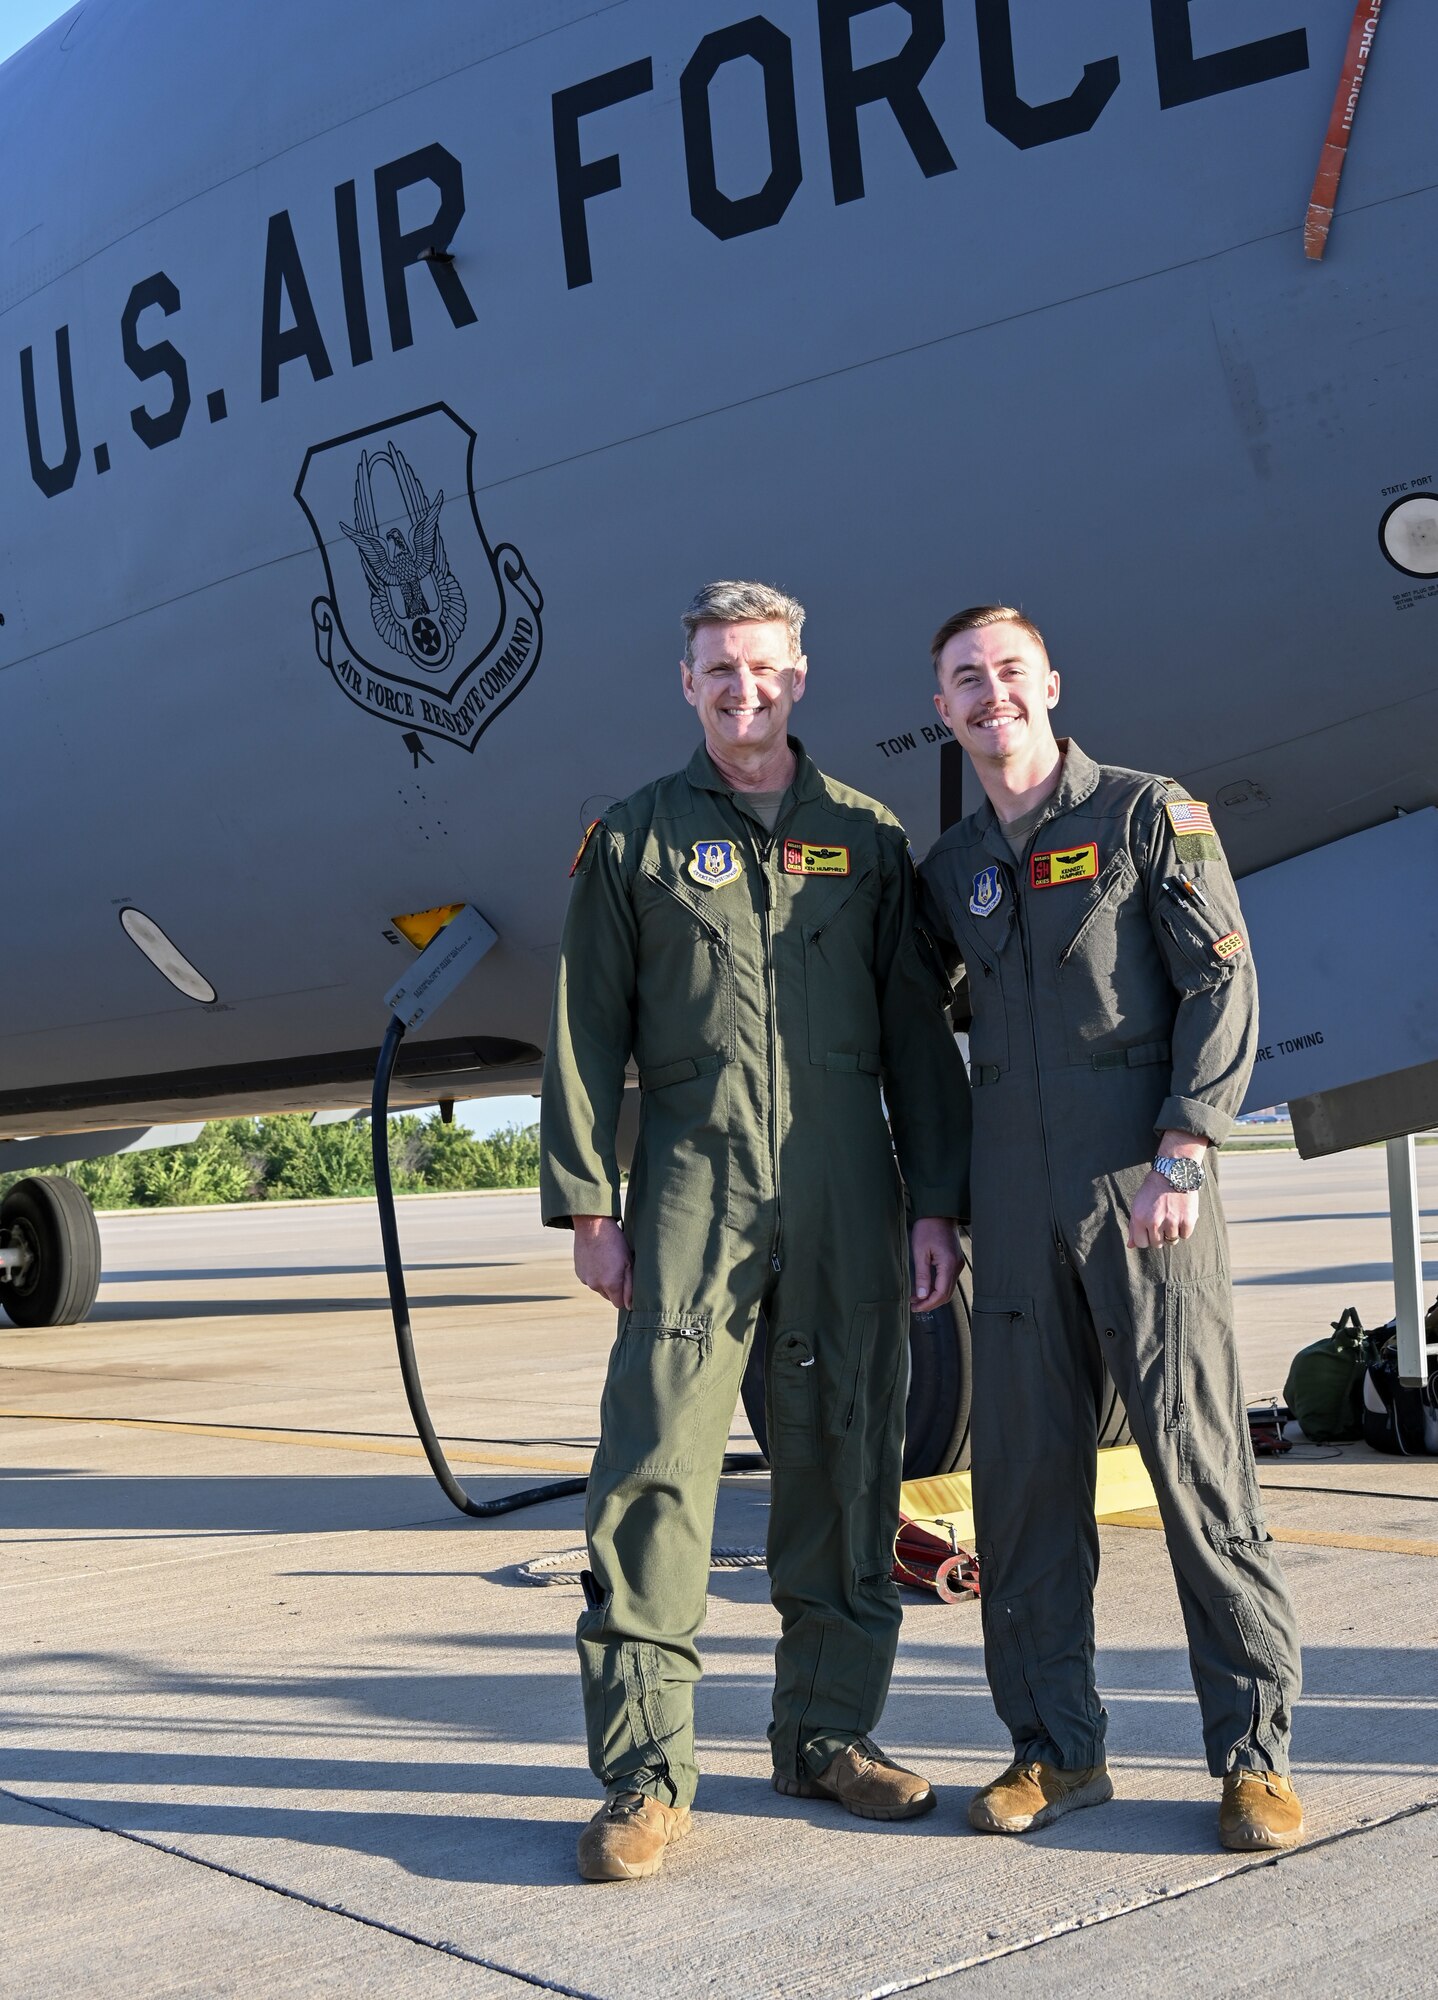 Col. Ken Humphrey, 507th Operations group commander, is joined by his son, 2nd Lt. Kennedy Humphrey, 71st Student Squadron student pilot, during his final flight as an 507th Air Refueling Wing Okie Sept. 29, 2022, Tinker Air Force Base, Oklahoma. 2nd Lt. Kennedy Humphrey will become a KC-135 pilot with the Okies at the conclusion of his training. Kennedy will be the third generation in his family to become an Okie. (U.S. Air Force photo by 2nd Lt. Mary Begy)